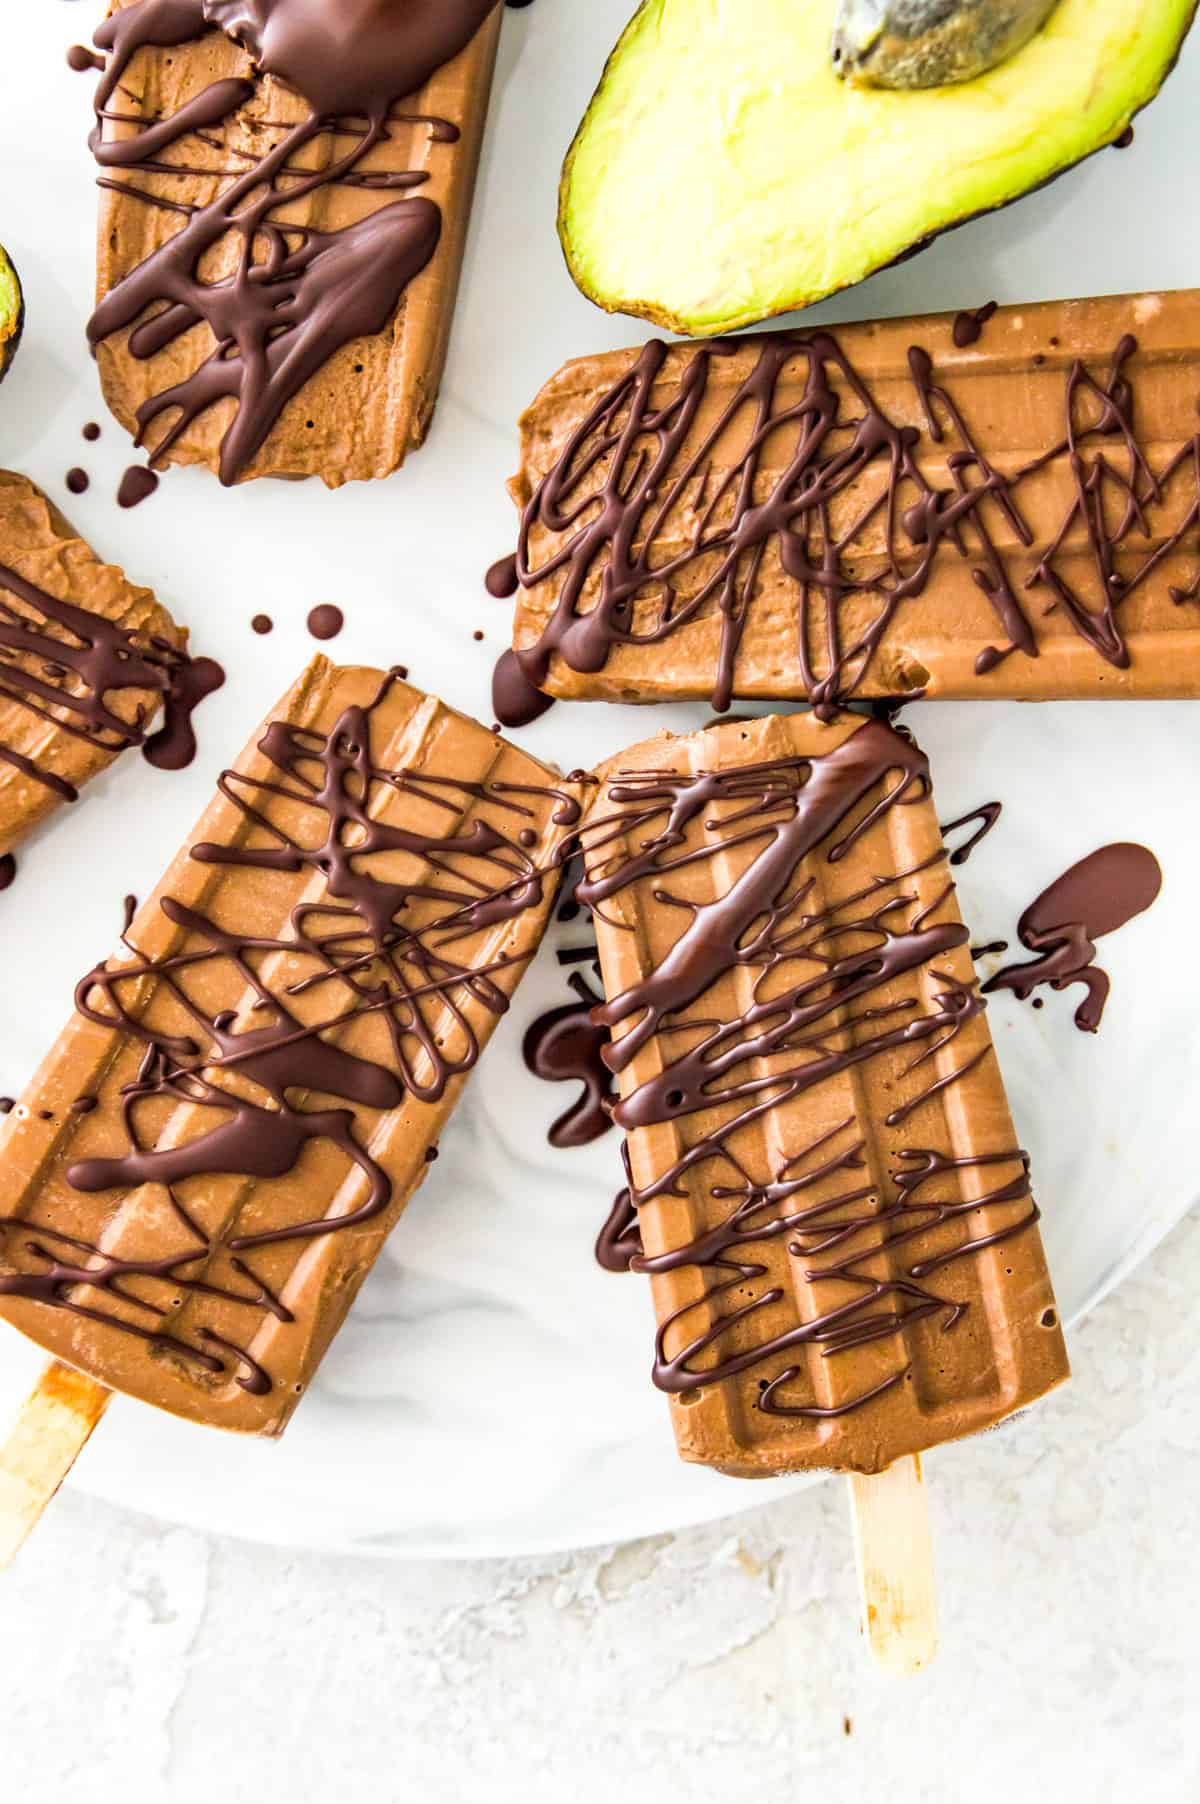 Chocolate popsicles drizzled in melted chocolate on a serving tray.